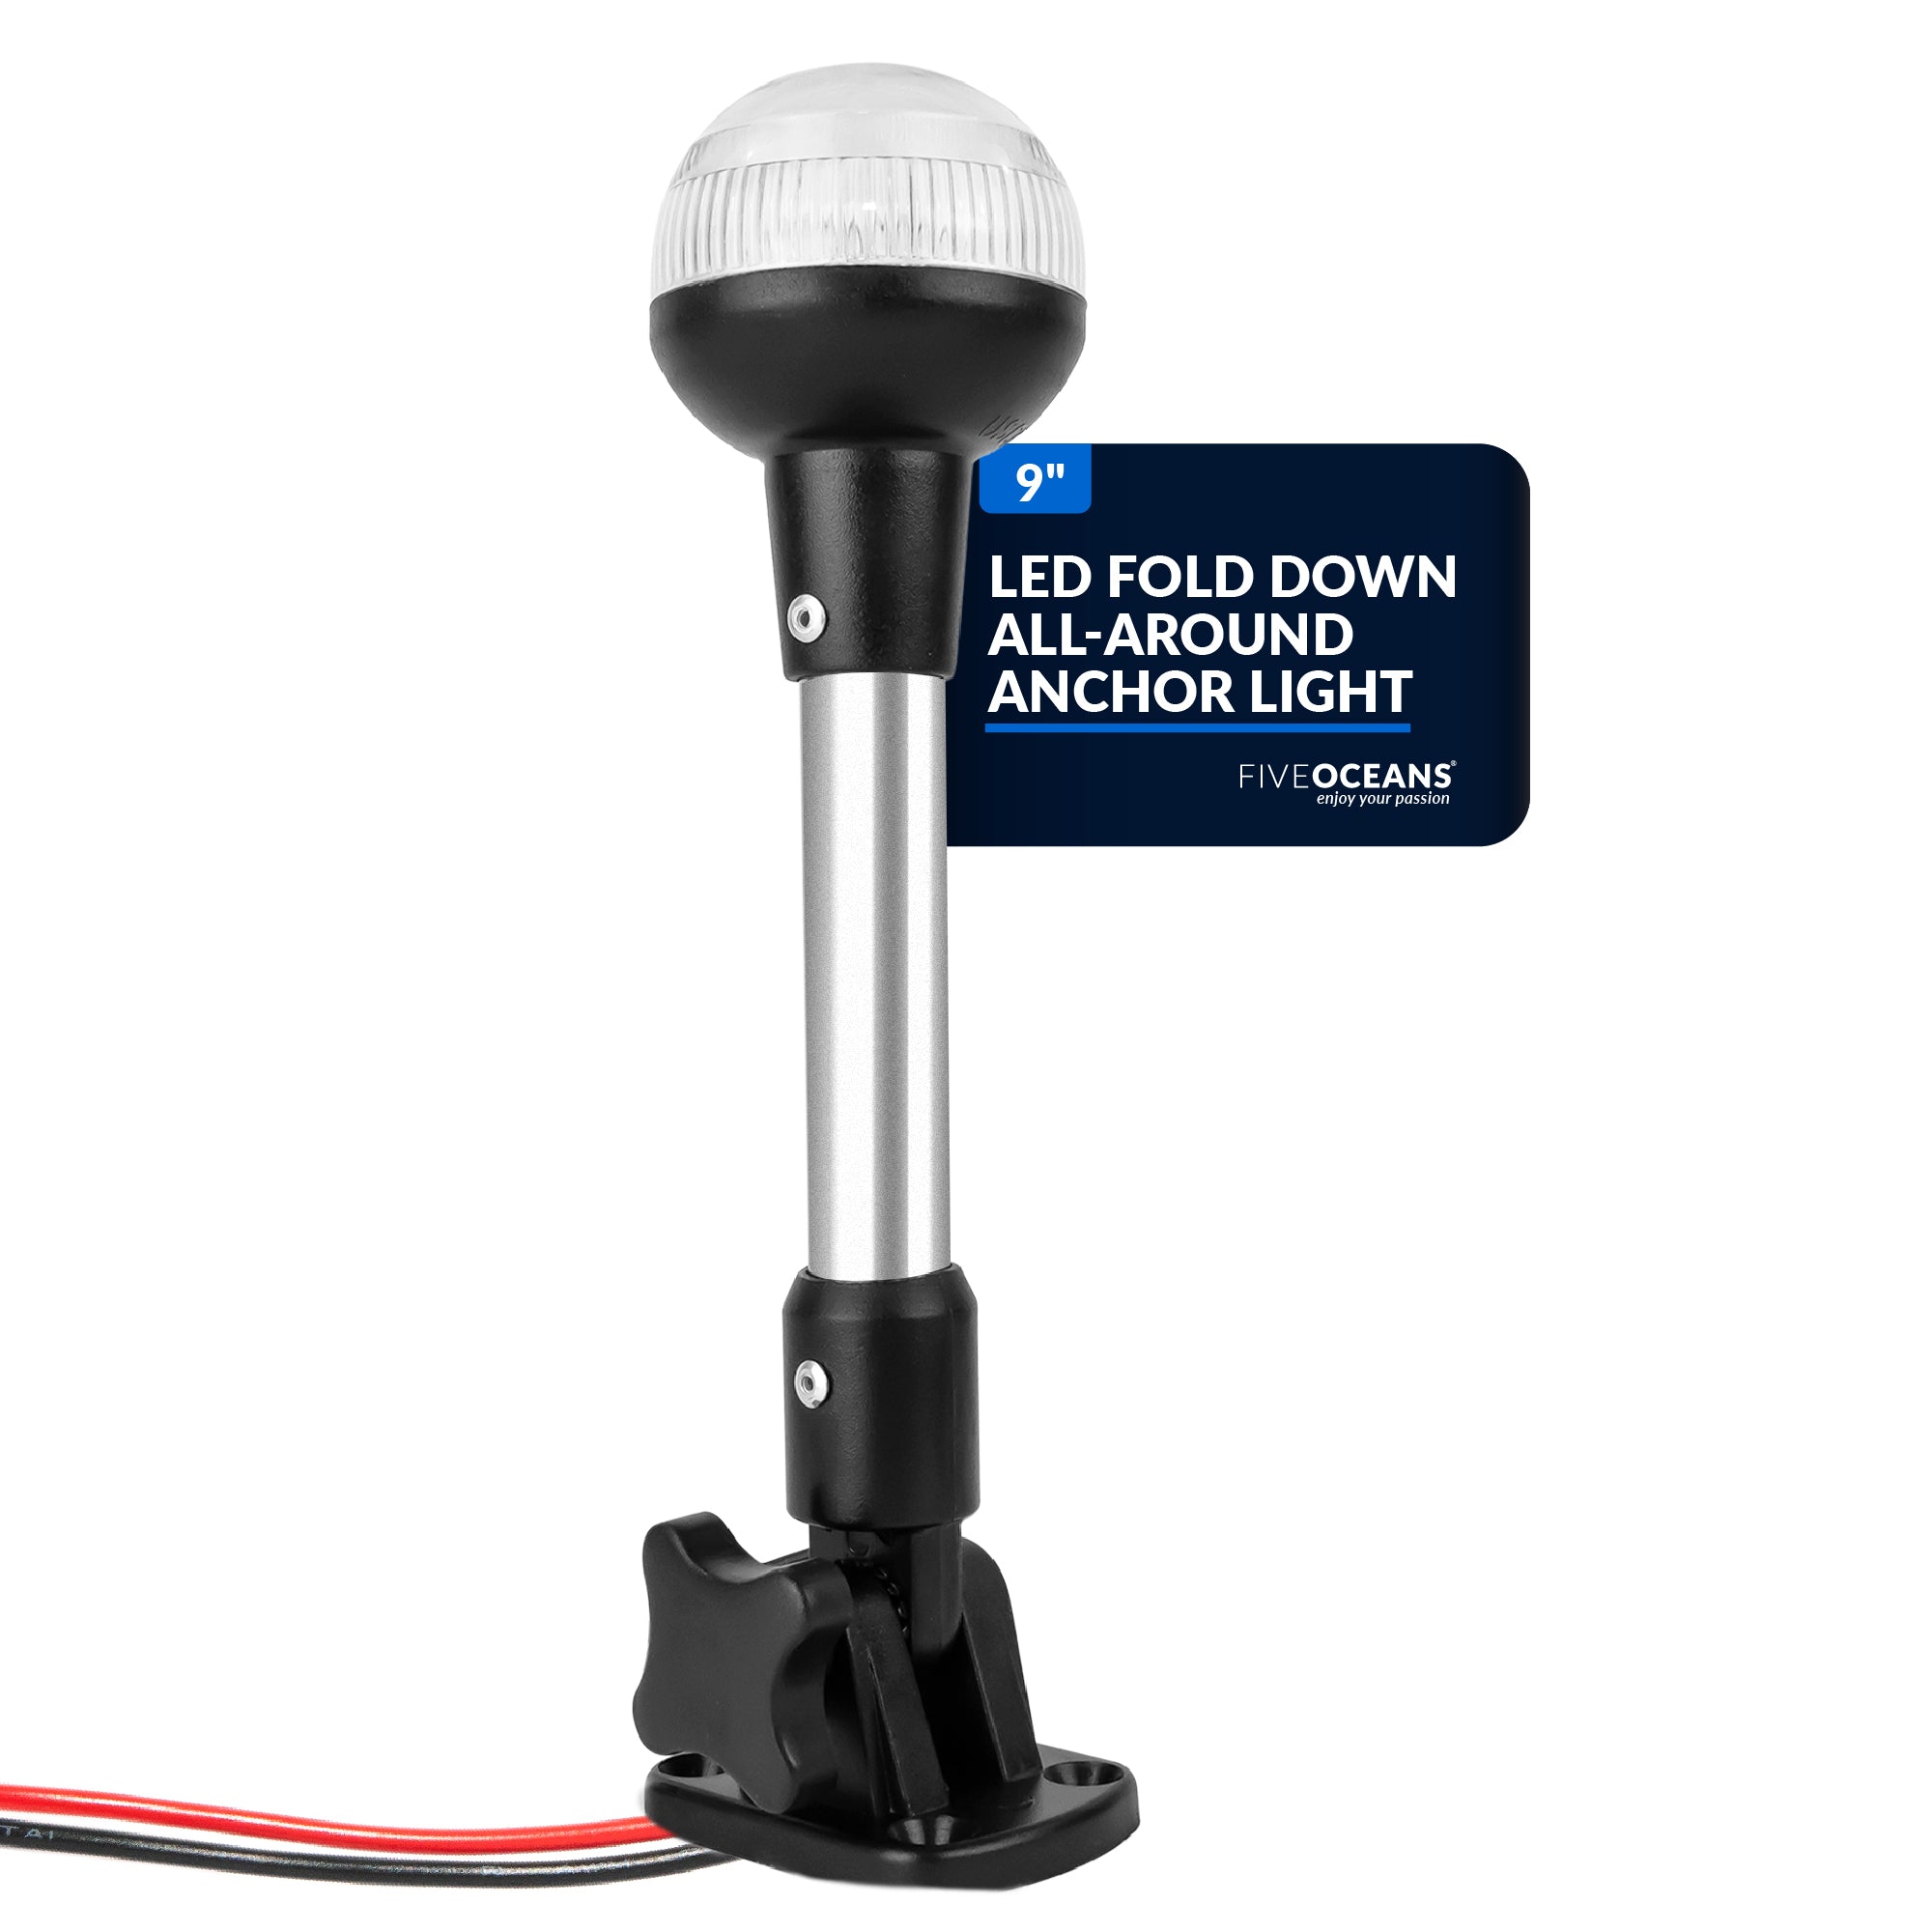 LED Anchor Navigation Light, 9" Fixed Mount, 2NM - FO4593